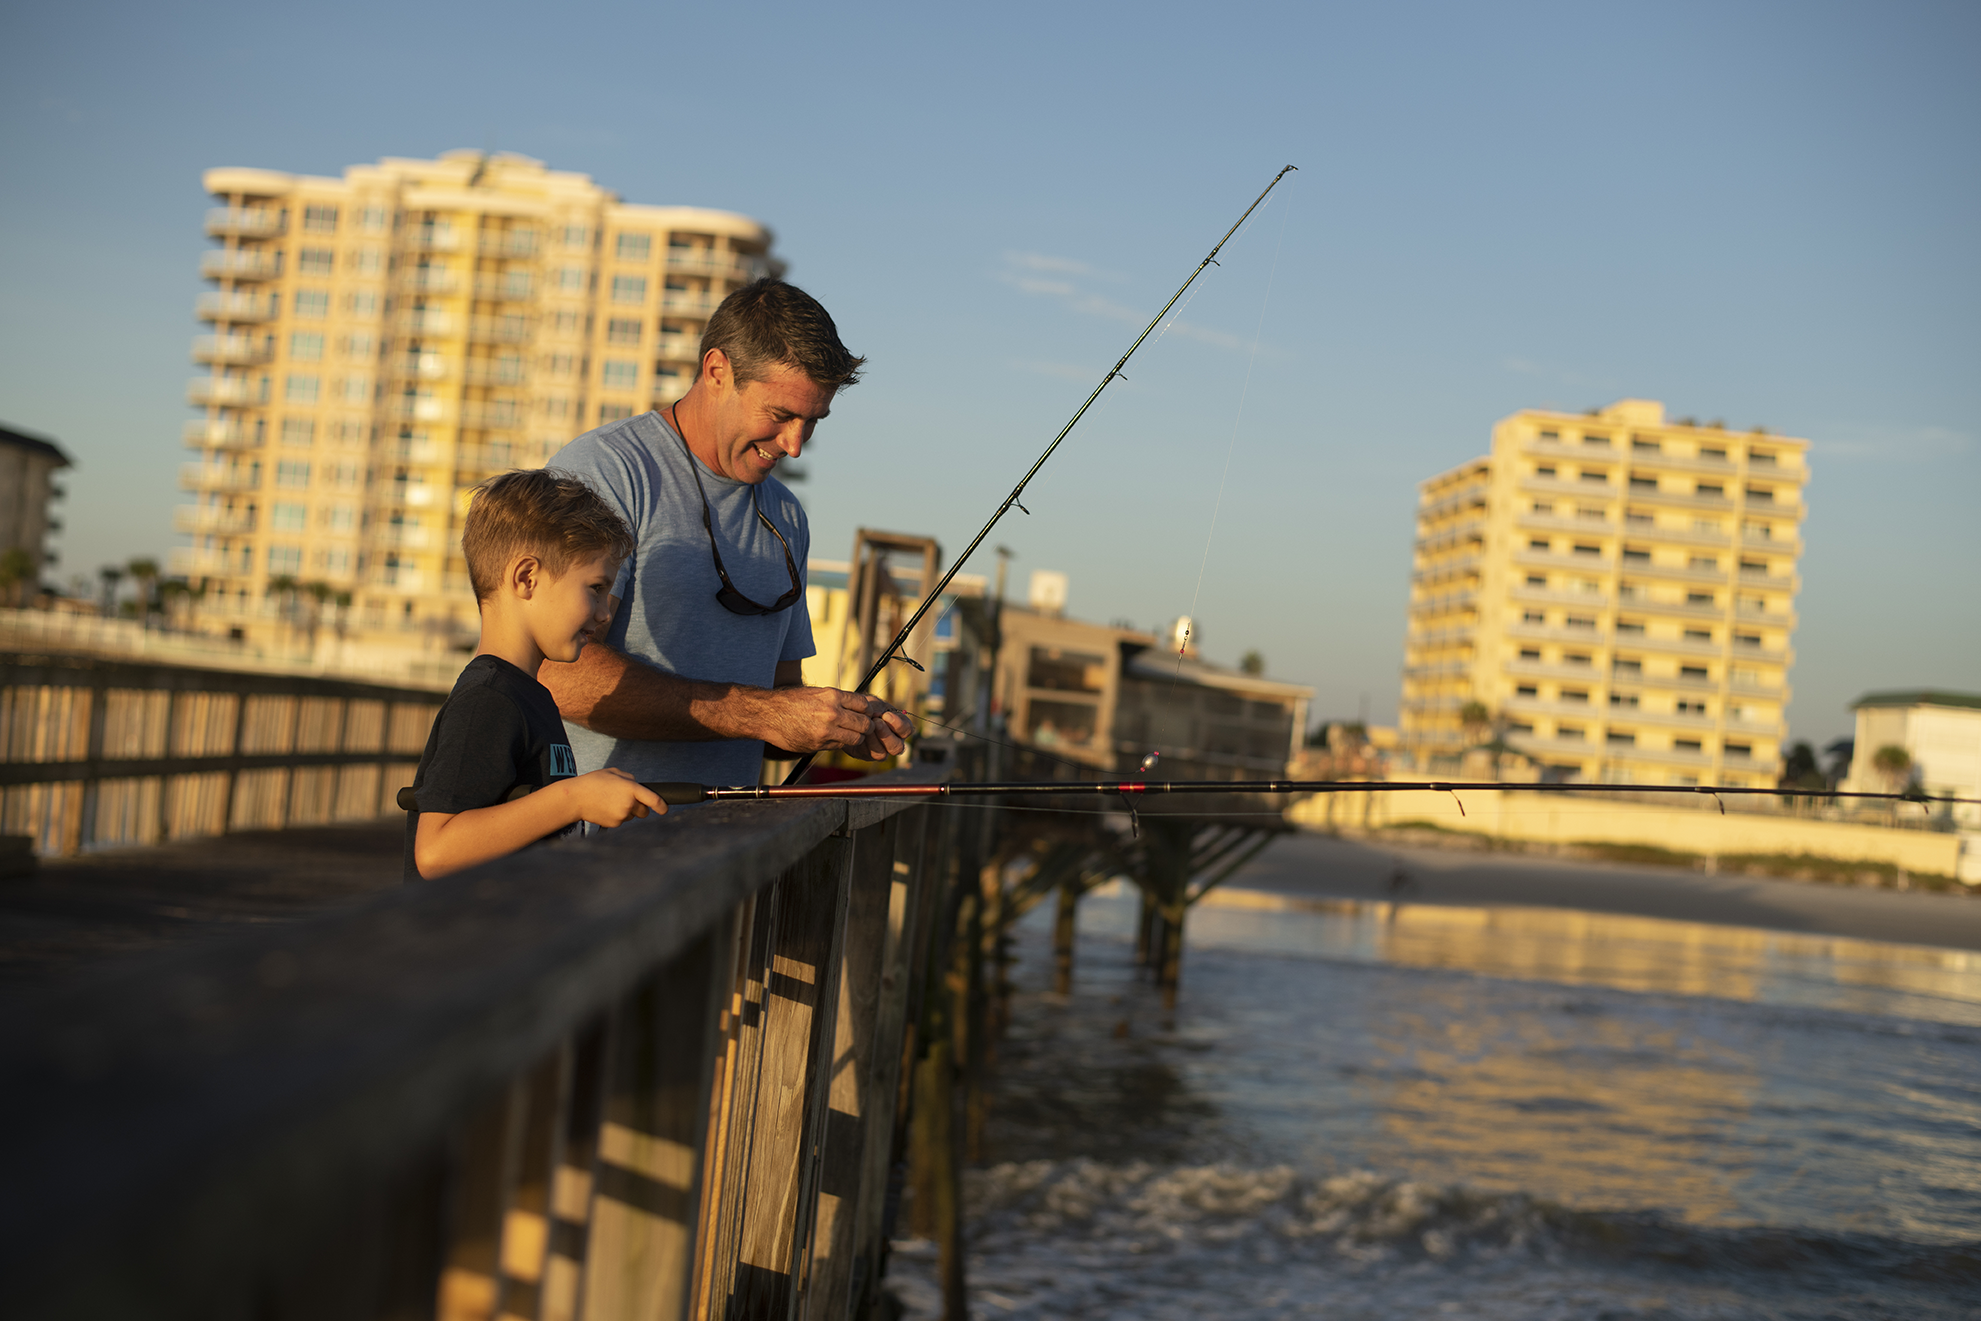 http://res.cloudinary.com/simpleview/image/upload/v1542145896/clients/daytonabeach/FatherSonFishing_DBShoot_ajneste_0475_45efaed2-313d-4236-85f1-0693c6237692.png